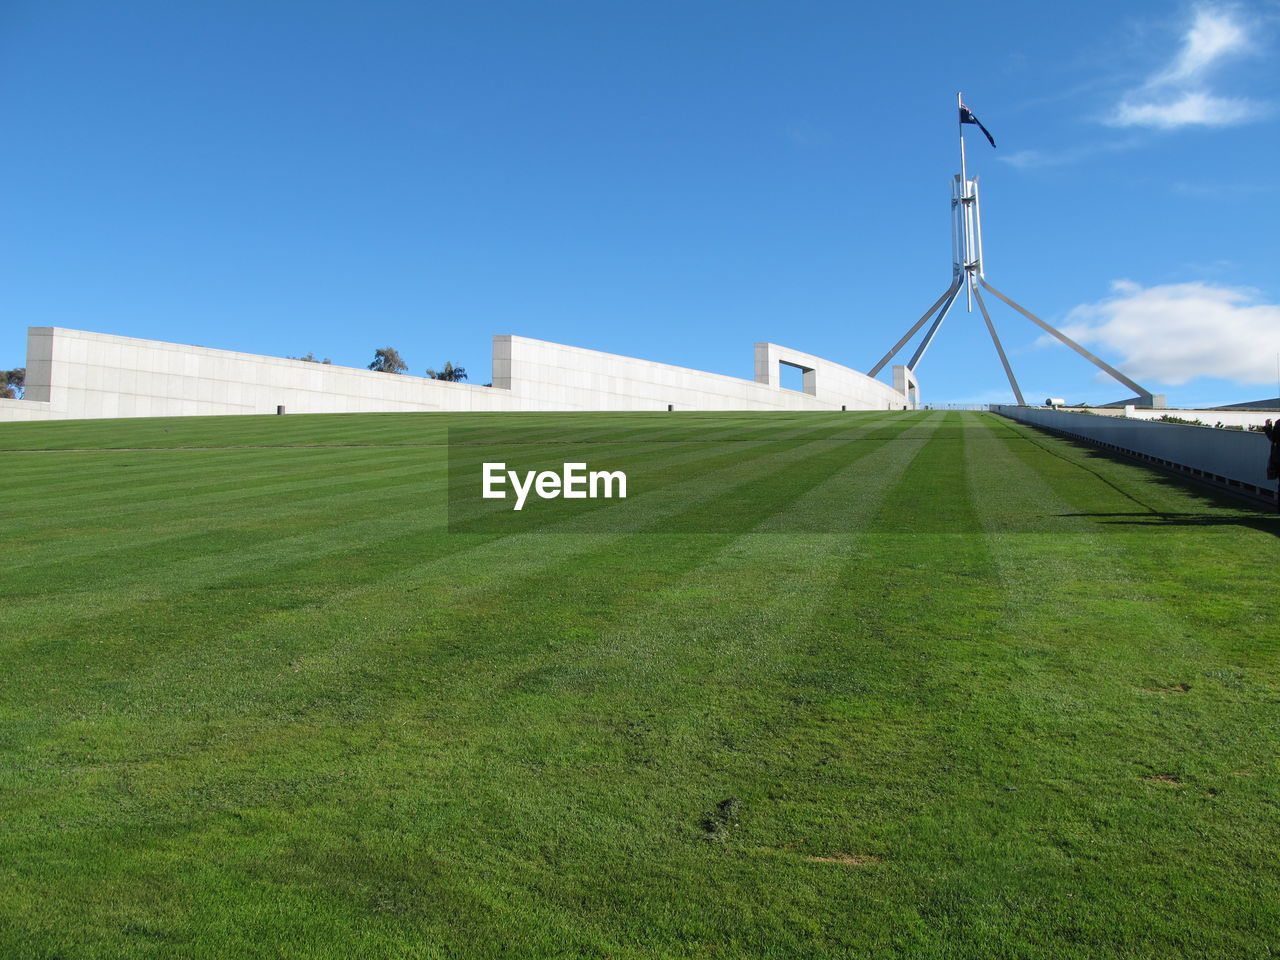 Grassy field at parliament building